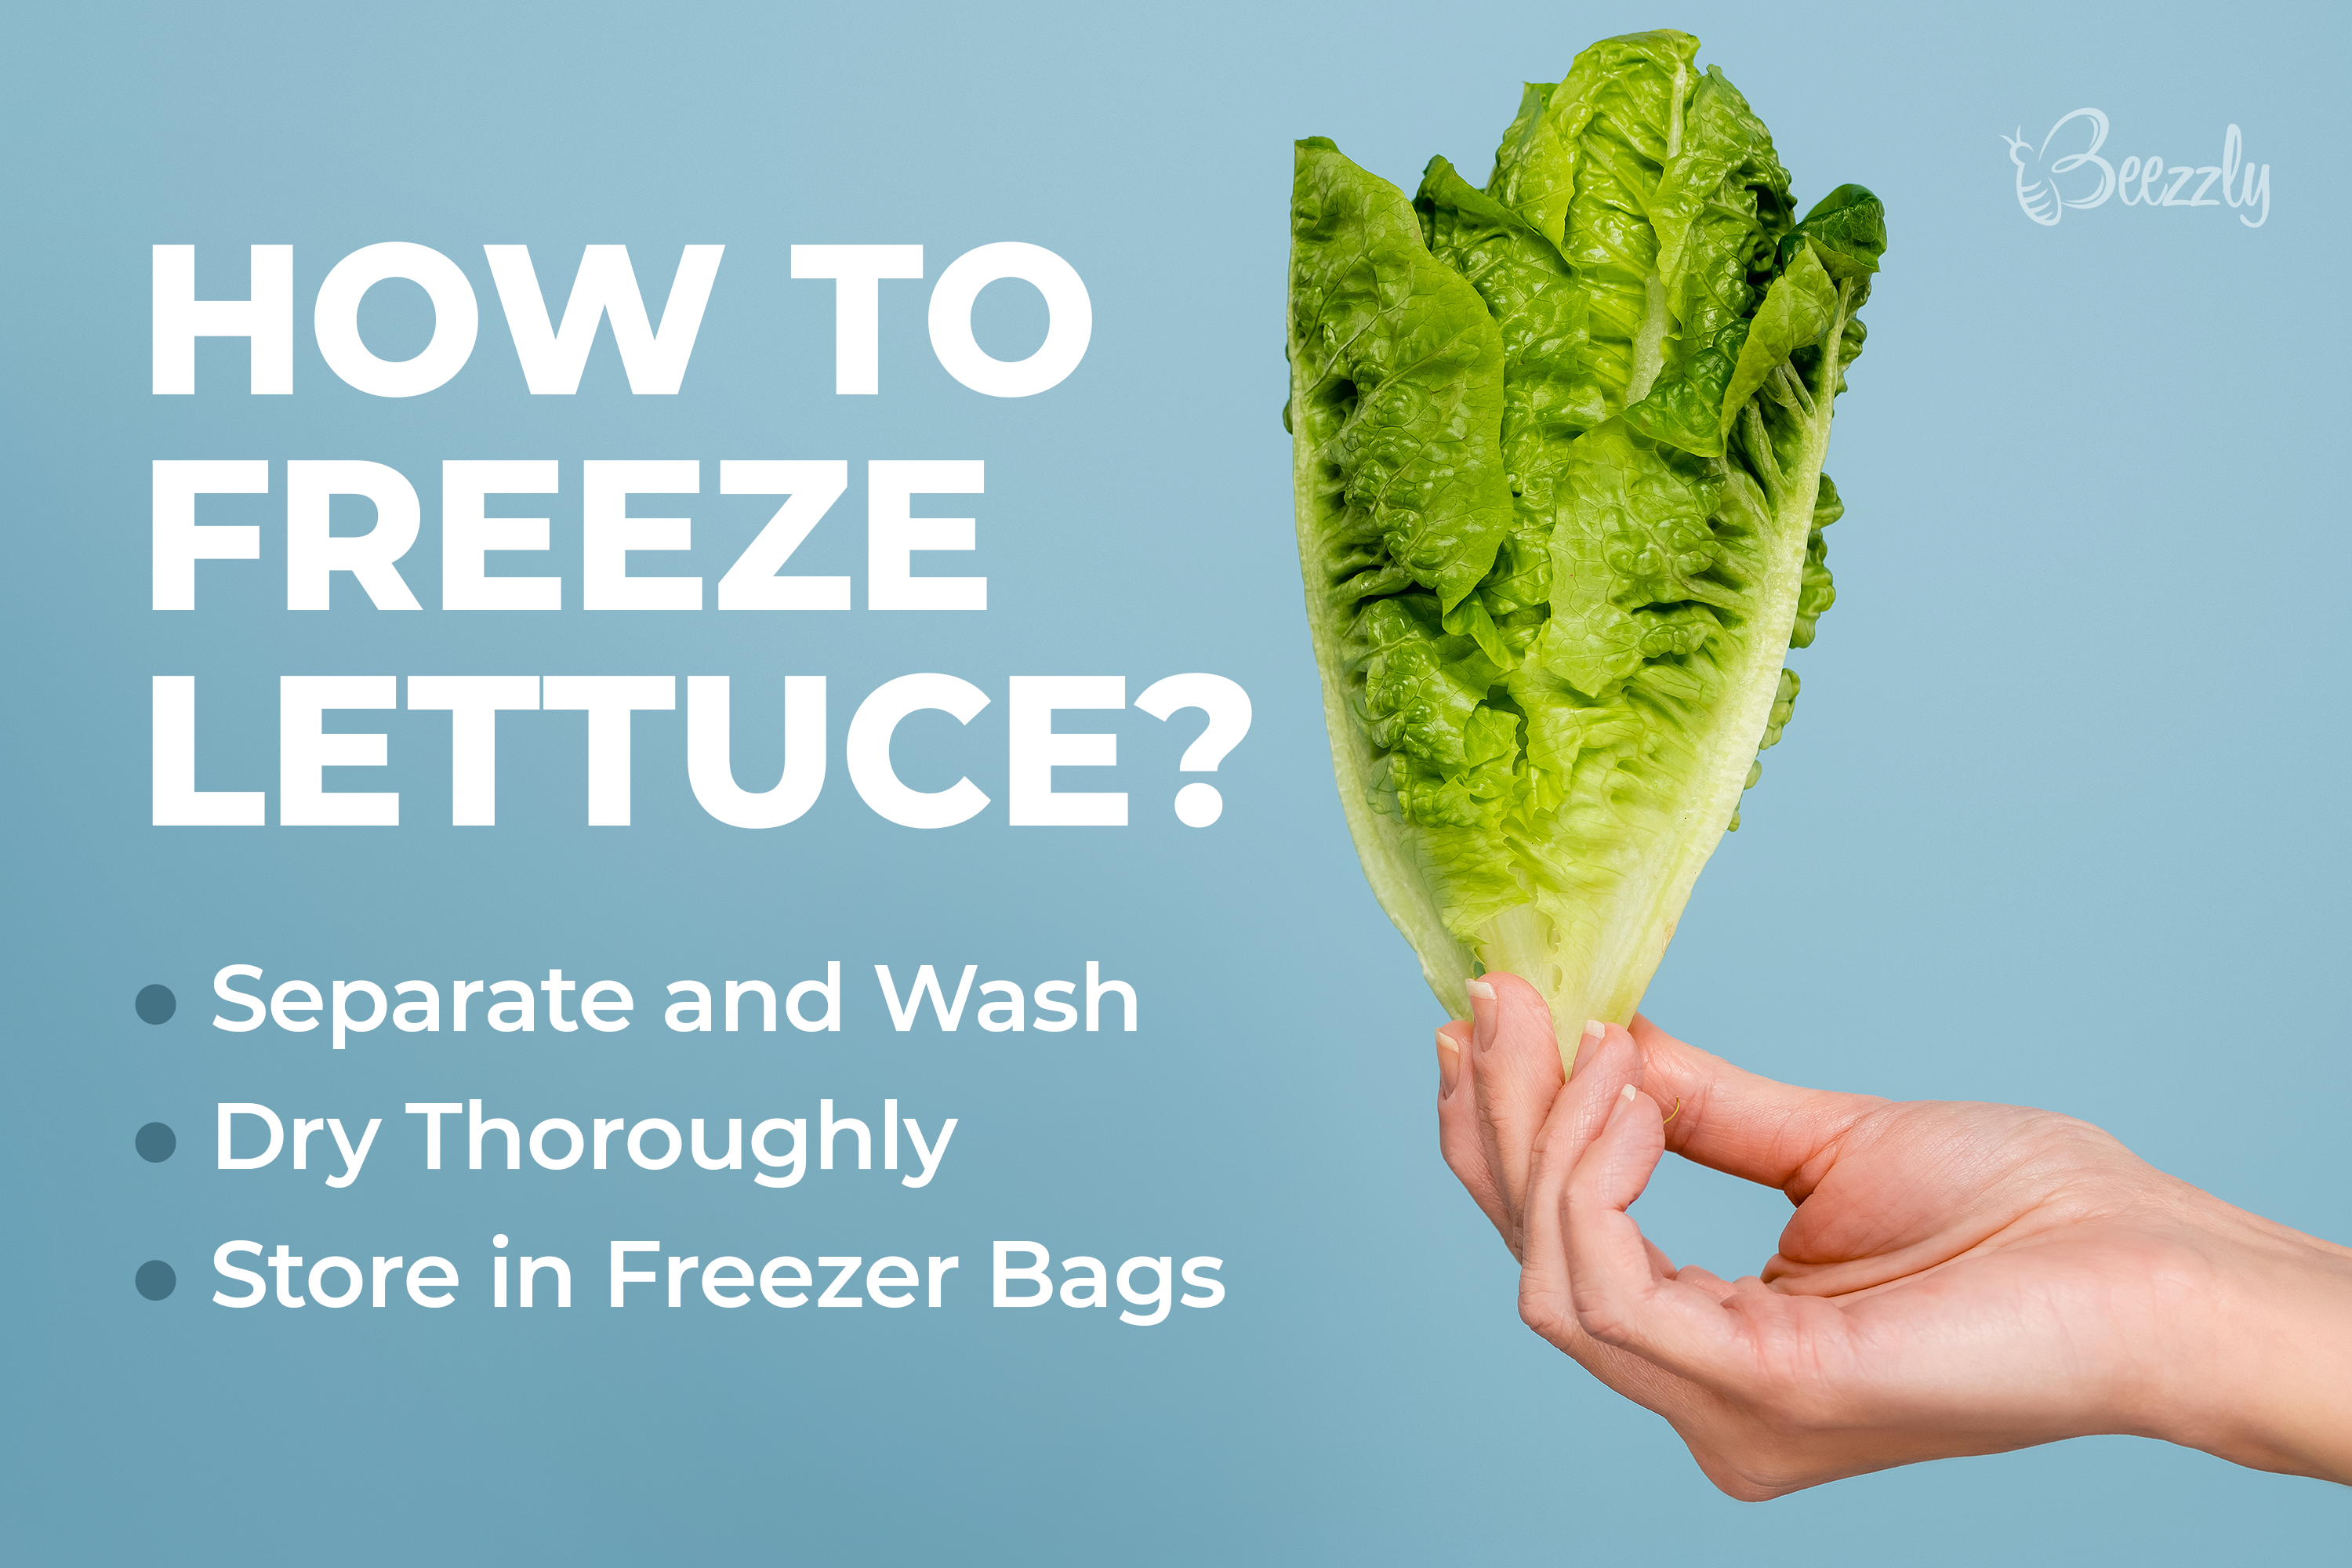 How to Freeze Lettuce